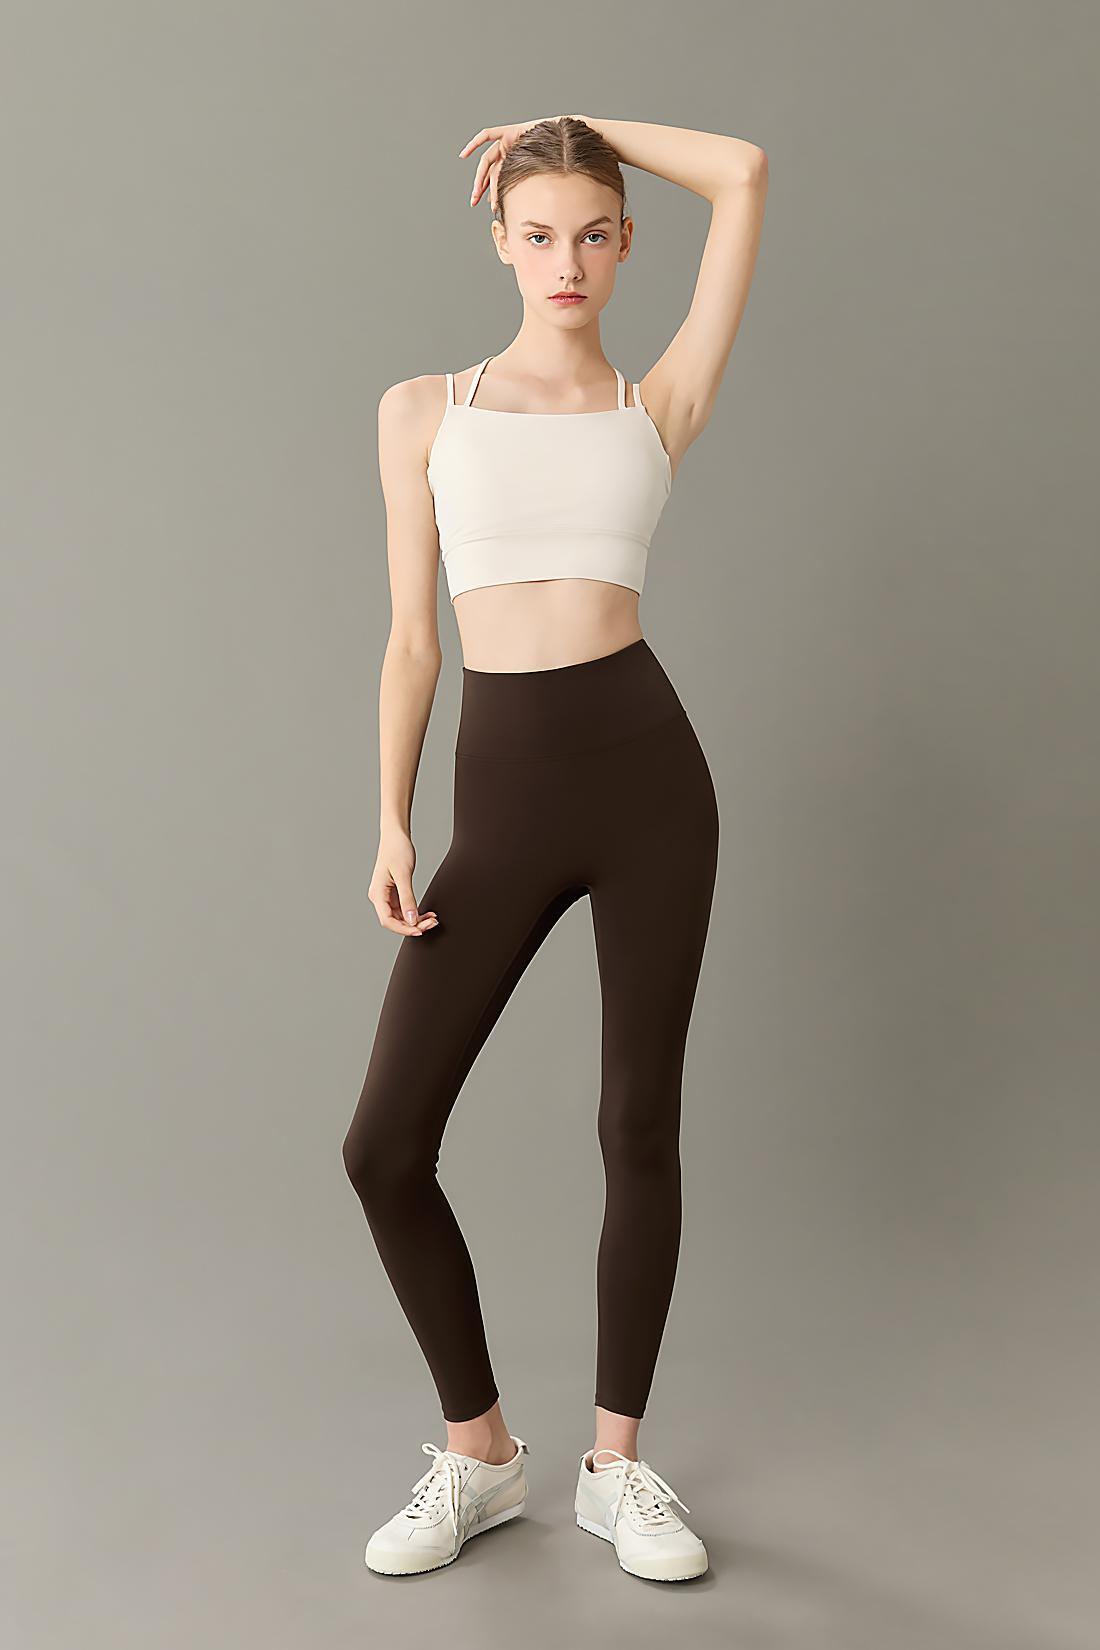 Airsoft Basic Leggings Stay Brown